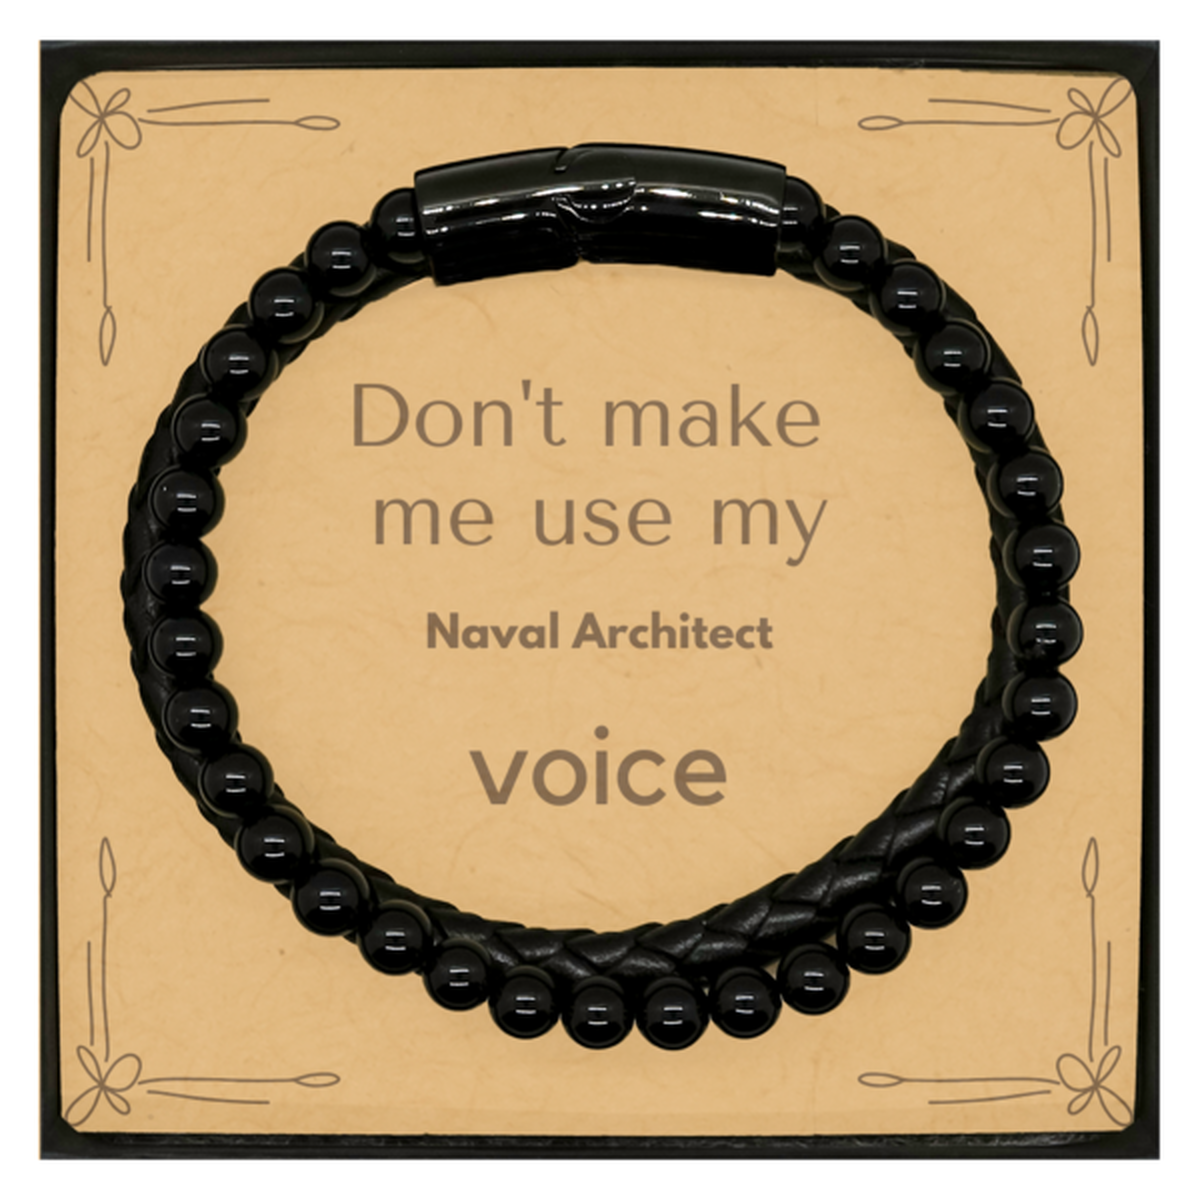 Don't make me use my Naval Architect voice, Sarcasm Naval Architect Card Gifts, Christmas Naval Architect Stone Leather Bracelets Birthday Unique Gifts For Naval Architect Coworkers, Men, Women, Colleague, Friends